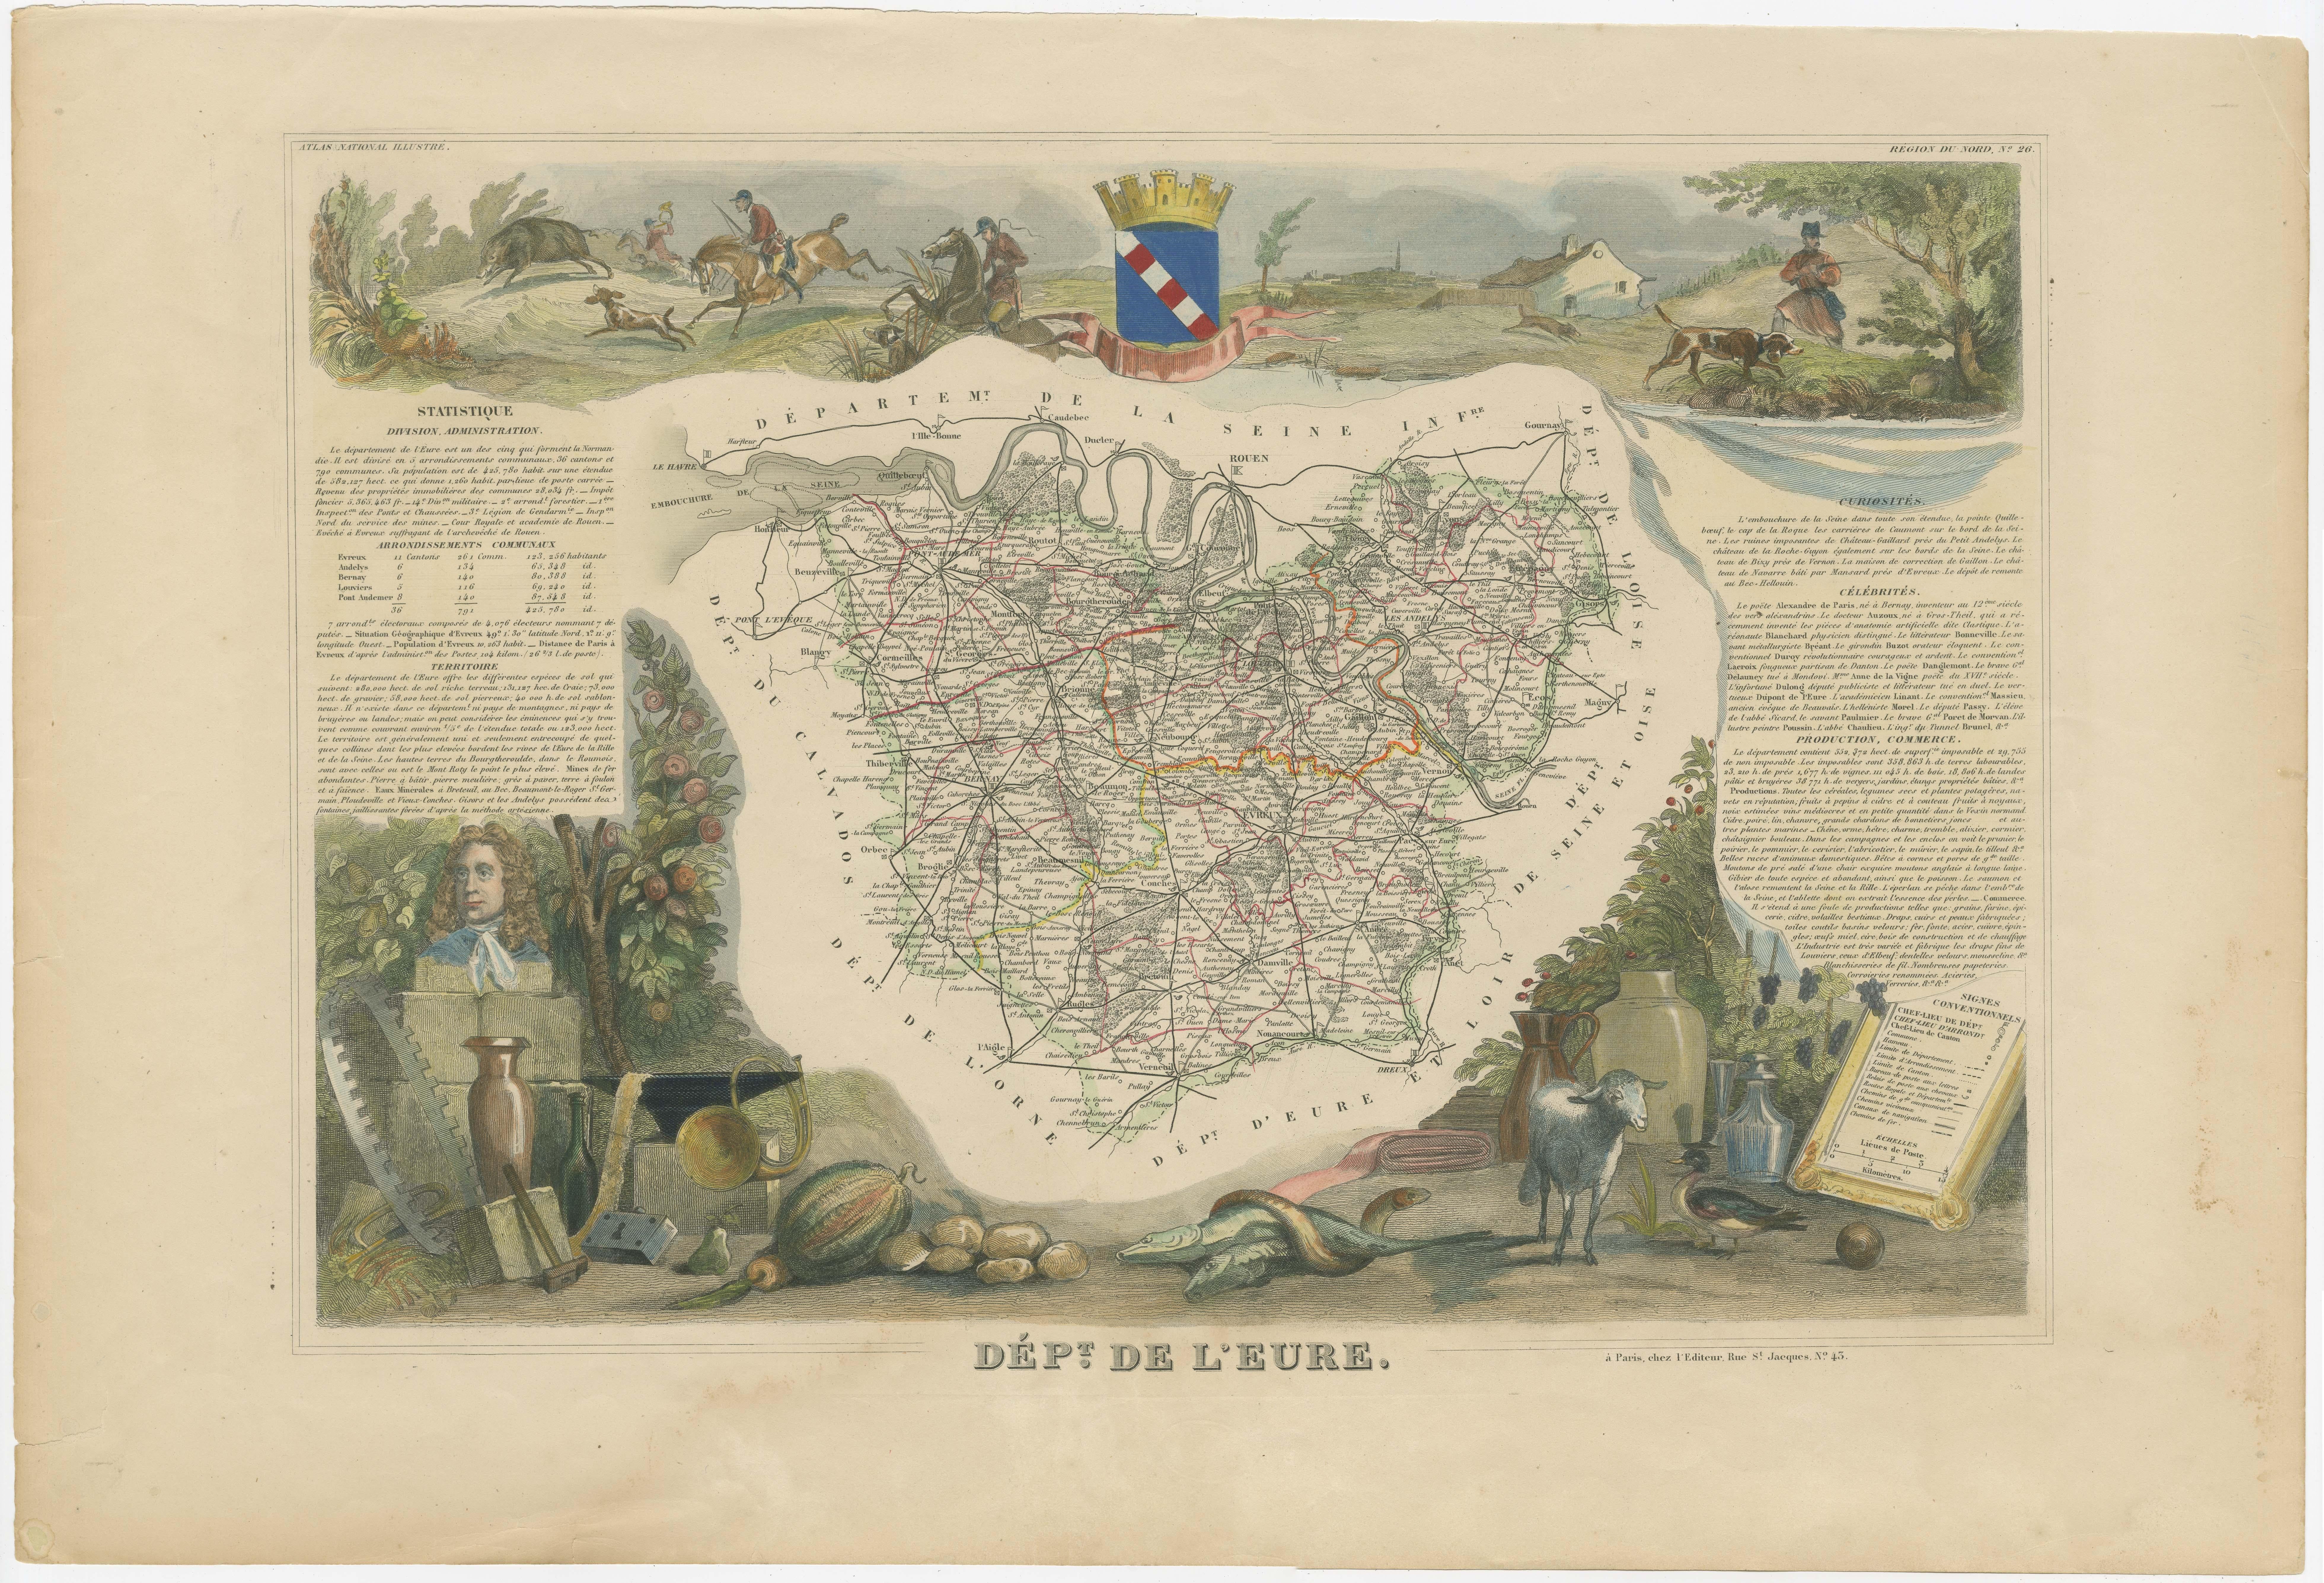 Antique map titled 'Dépt. de l'Eure'. Map of the French department of Eure, France. This region of France is home to Giverny, where impressionist Claude Monet’s home and garden can be seen. The whole is surrounded by elaborate decorative engravings